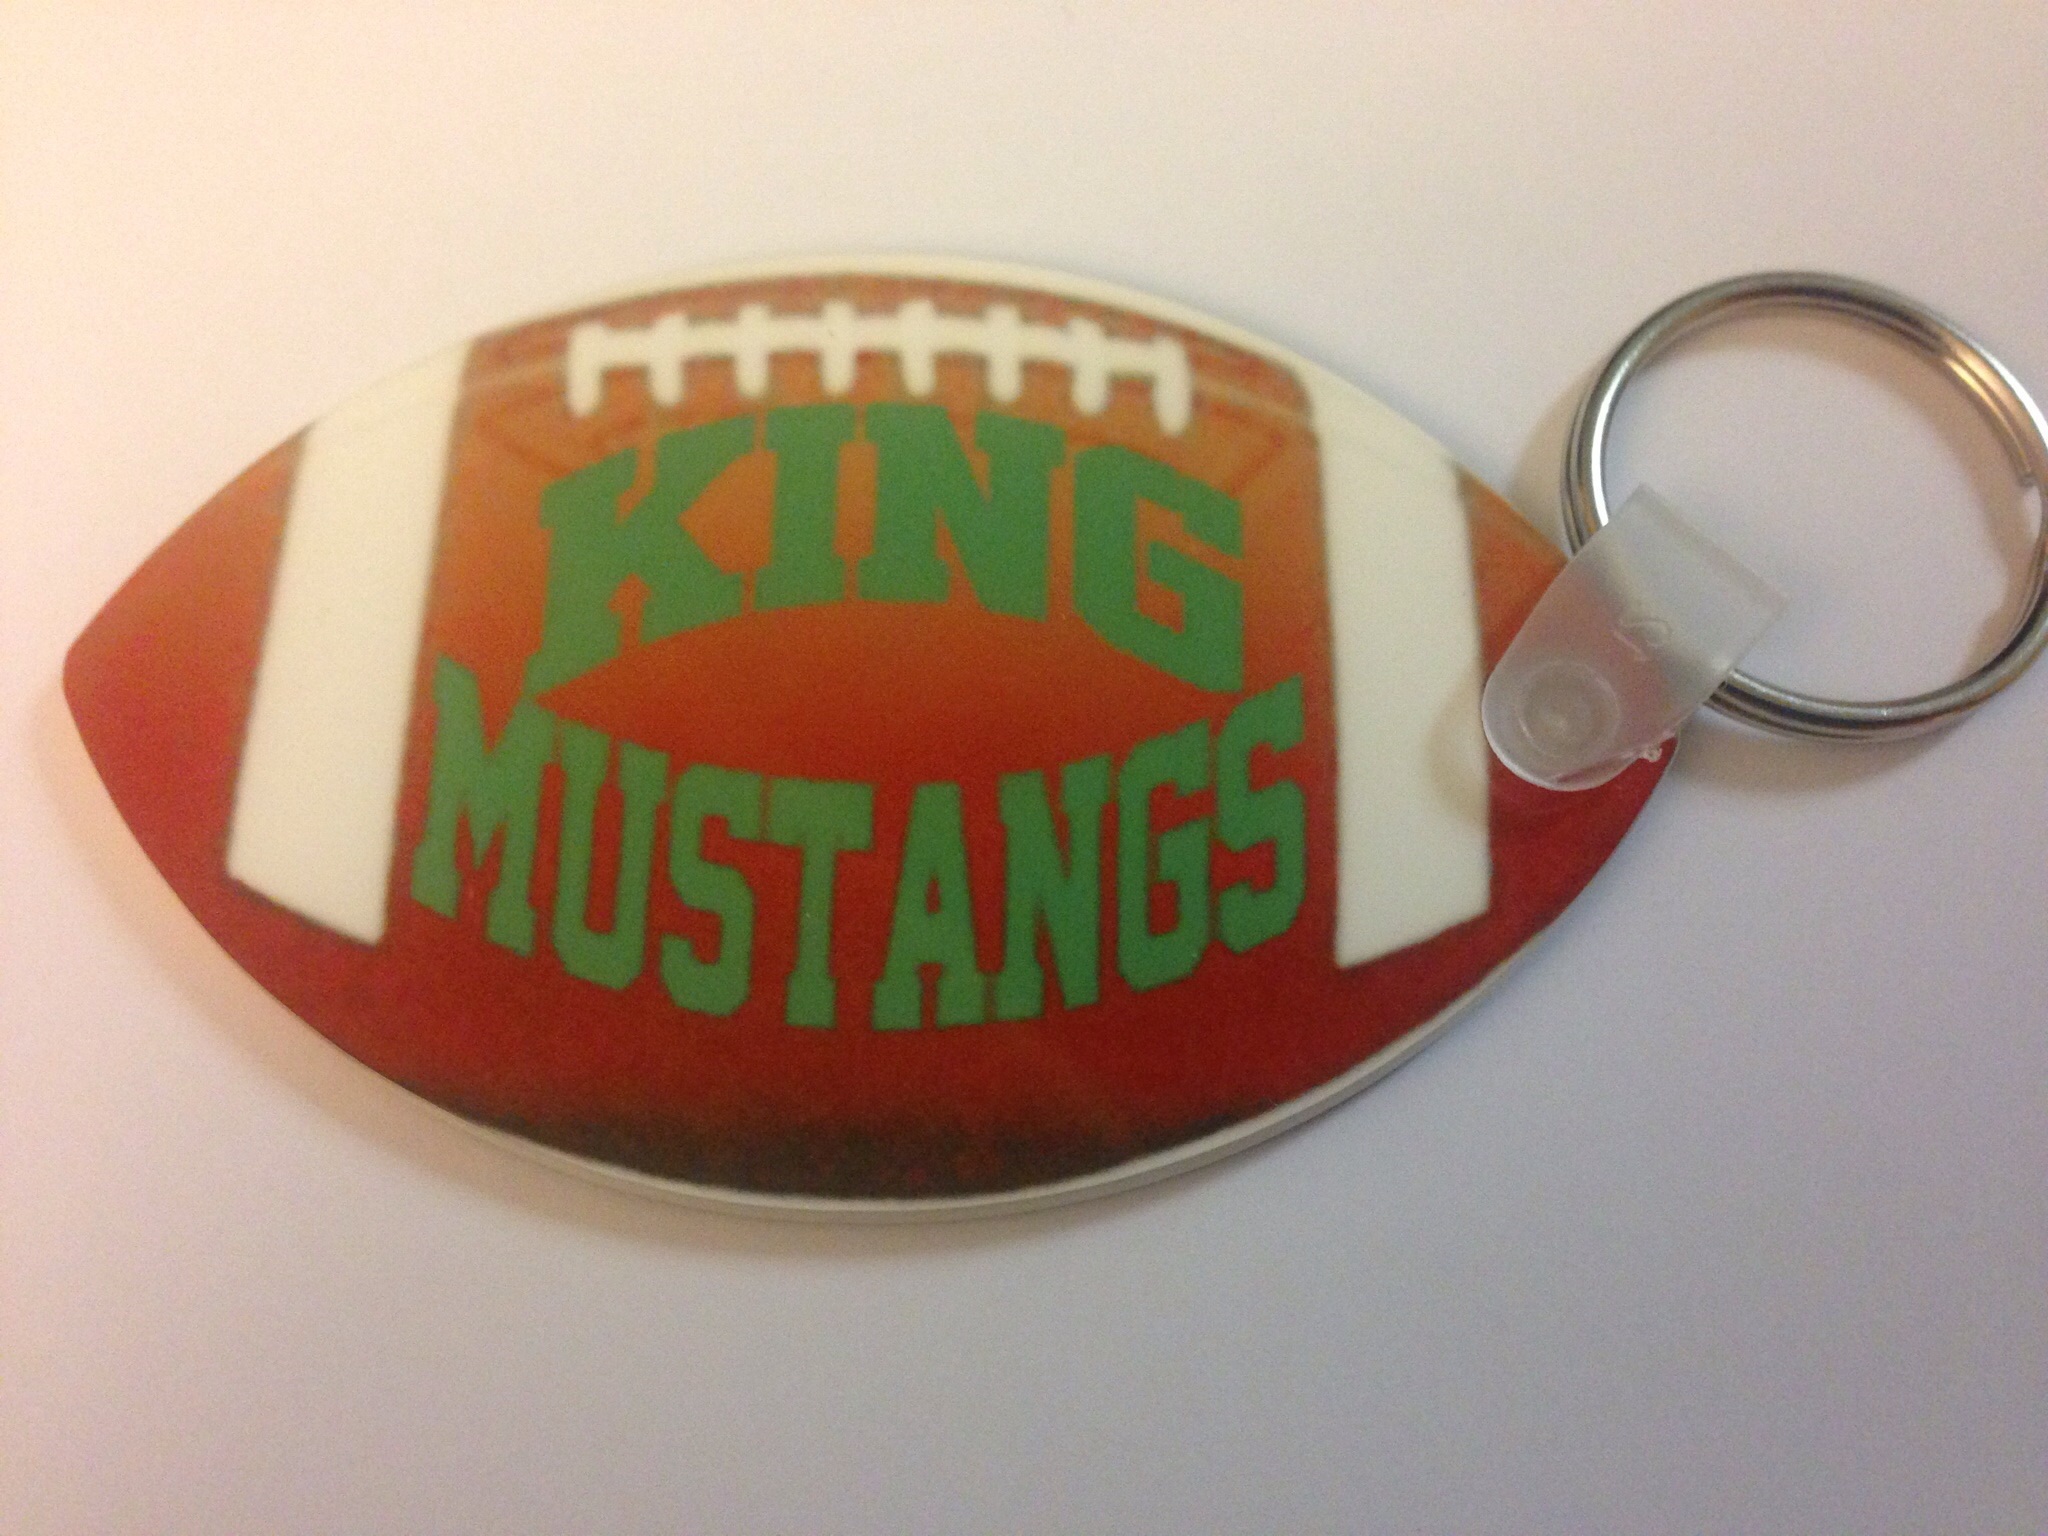 Football Key Chain made with sublimation printing